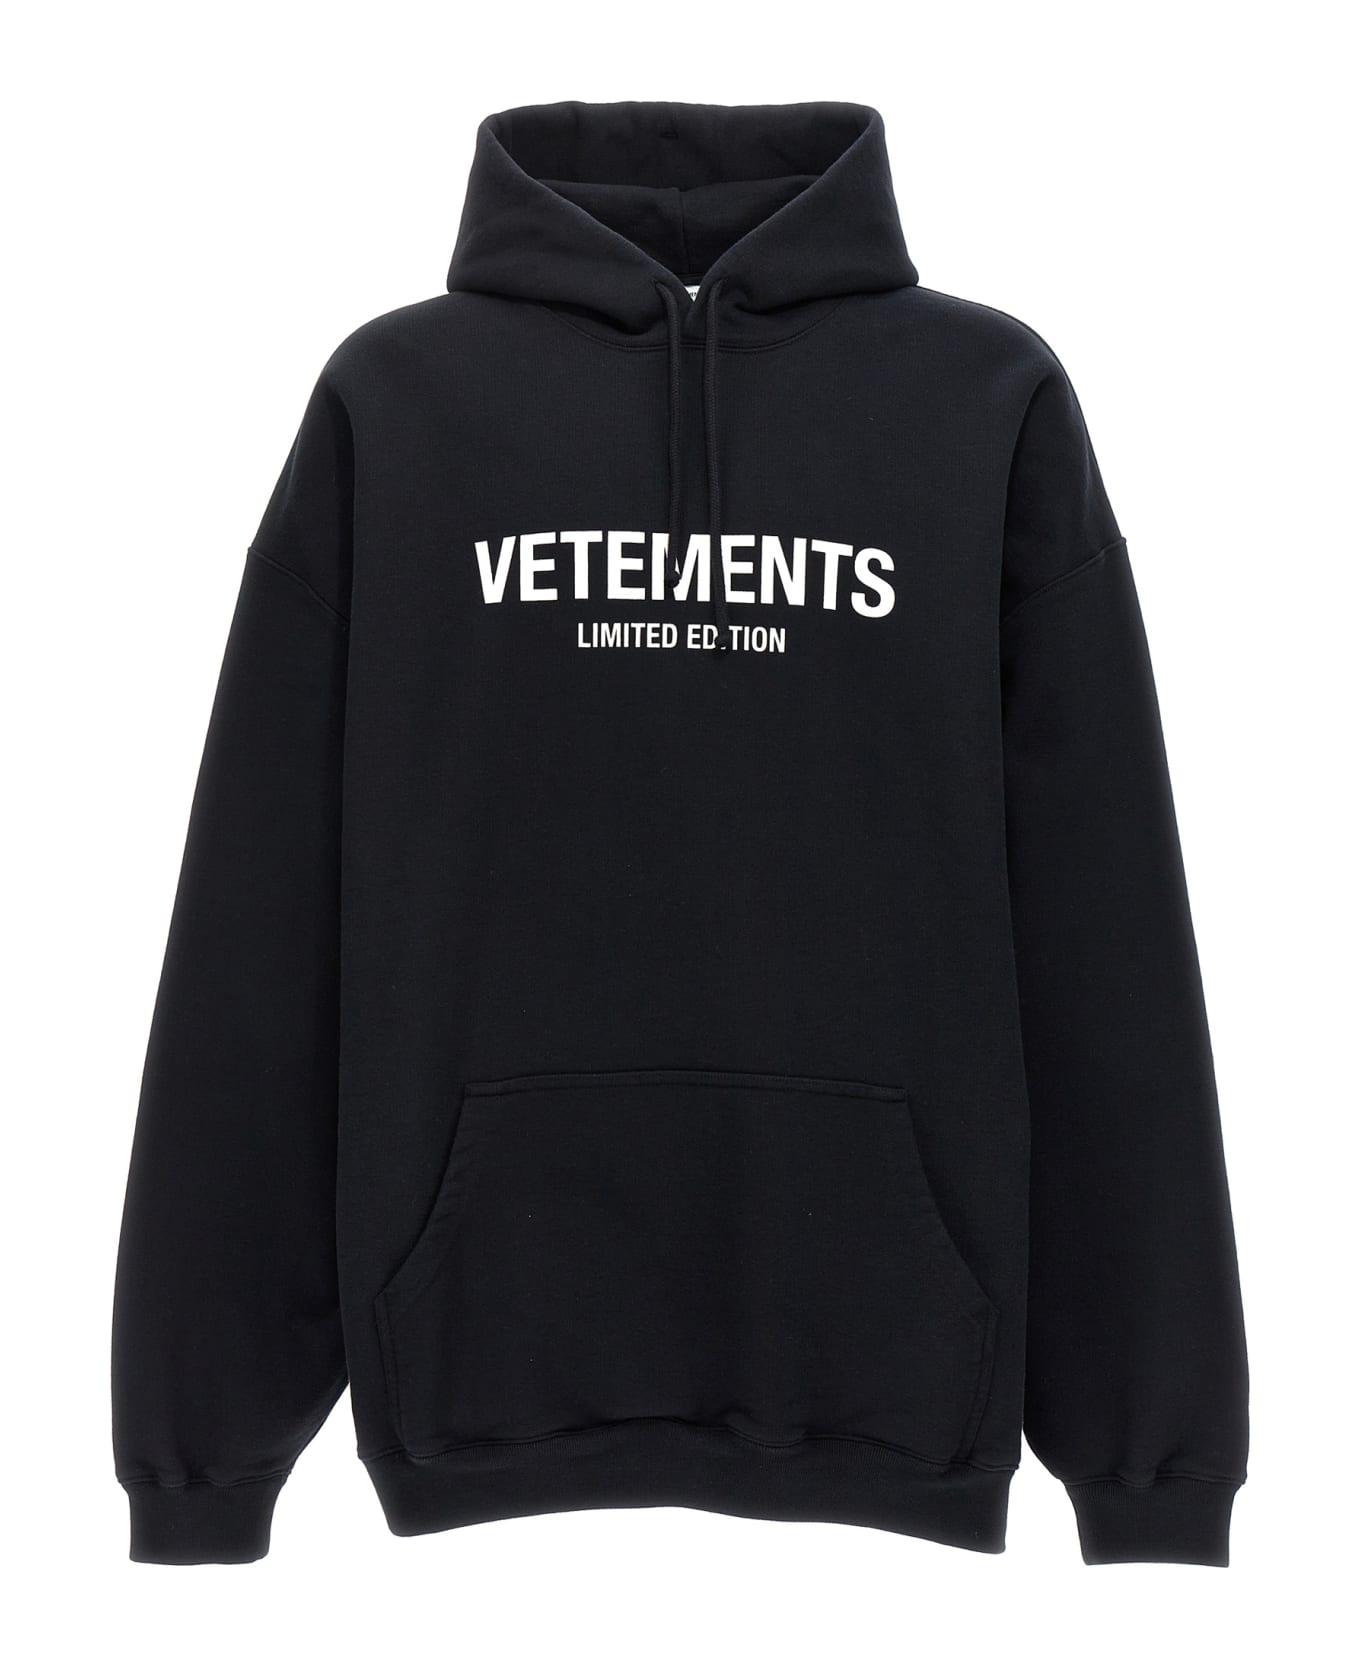 VETEMENTS 'limited Edition Logo' Hoodie - White/Black